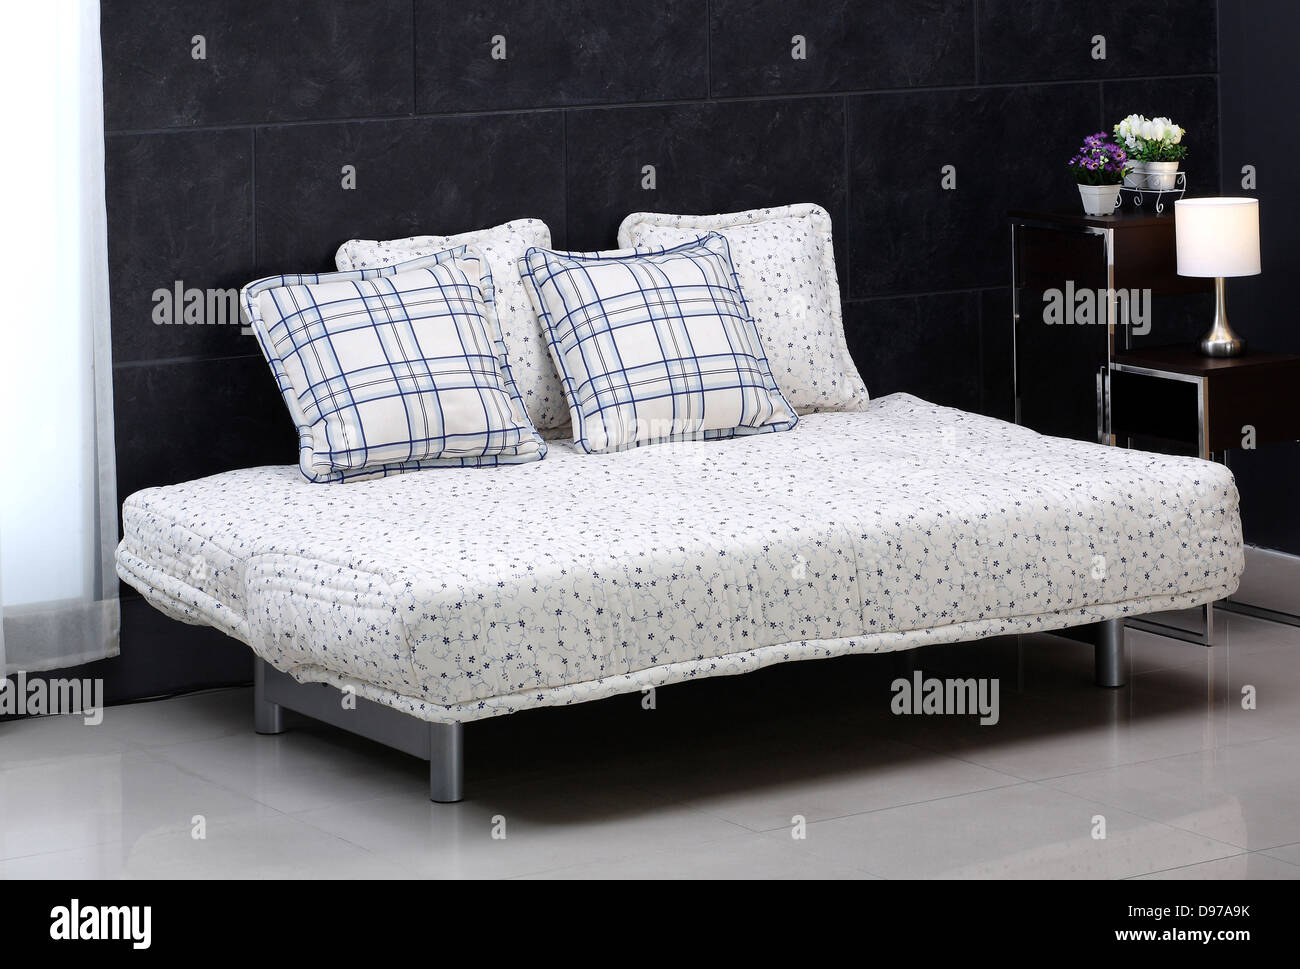 A lovely comfortable sofa bed and cute cushions Stock Photo